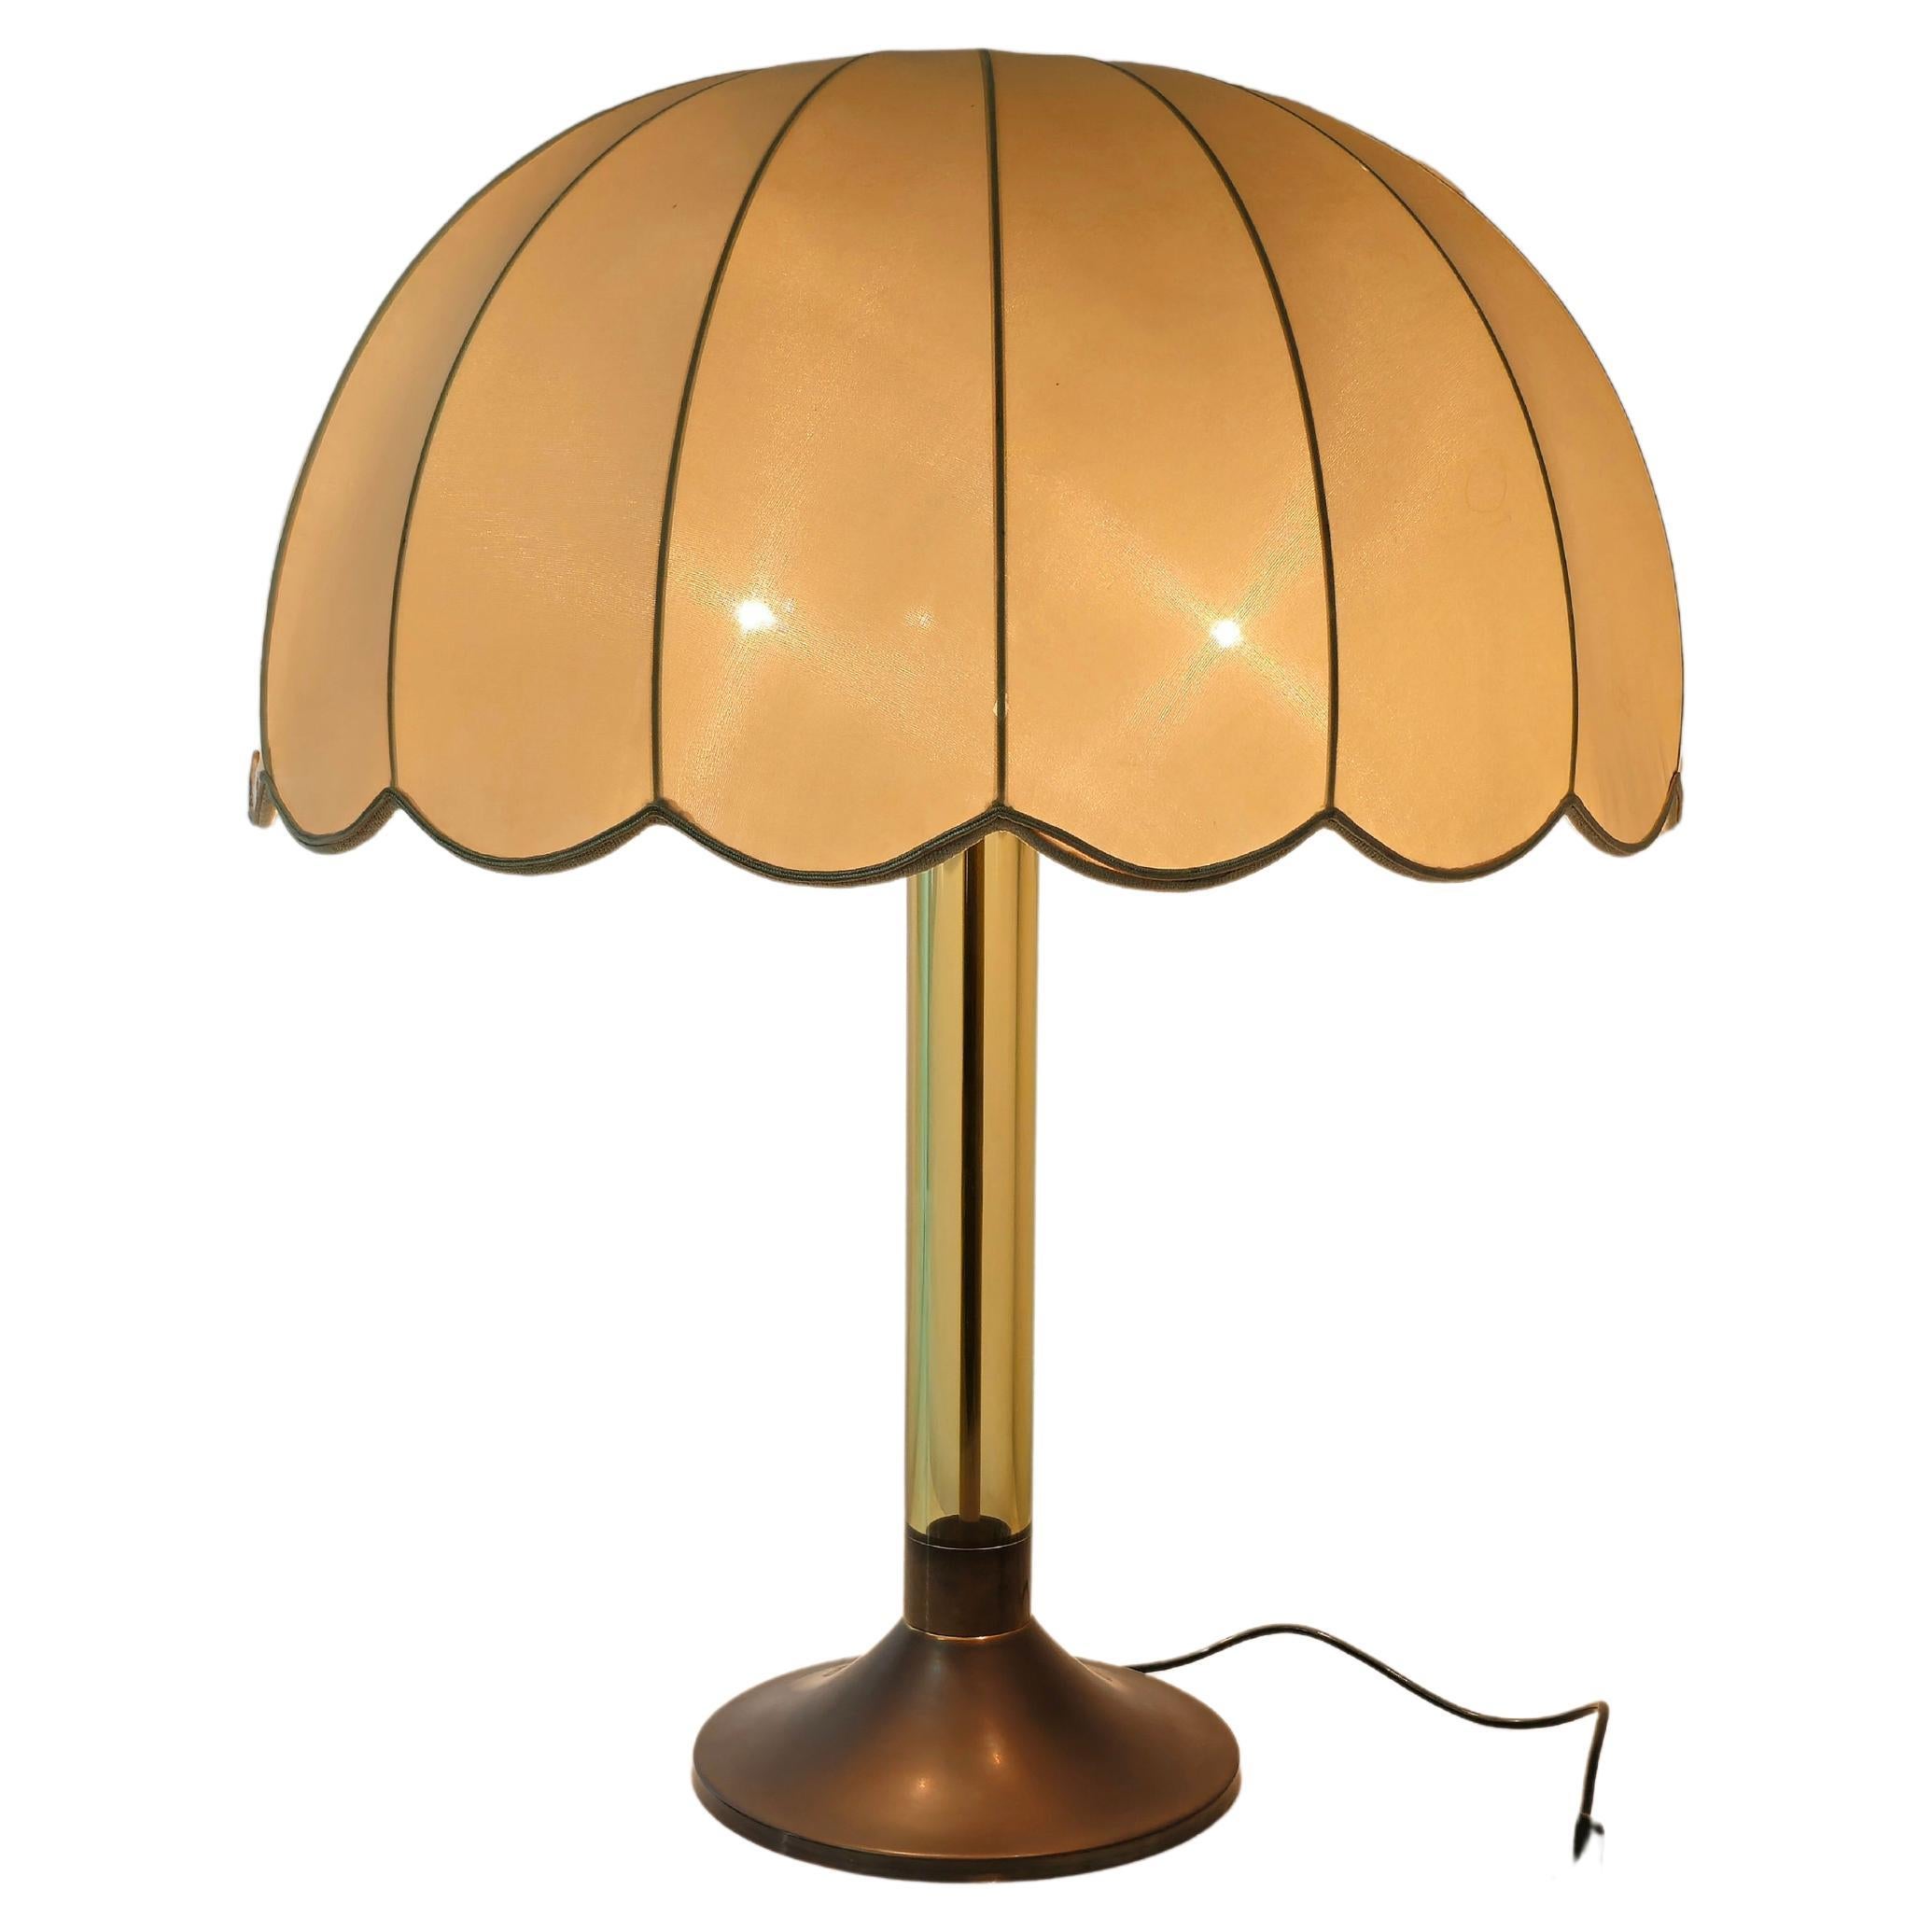 Table lamp of considerable dimensions produced in Italy in the 60s.
The lamp was made with a burnished brass structure with two directional E27 lights, a tubular plexiglass stem in aqua green tones and a hemispherical lampshade in ivory-colored